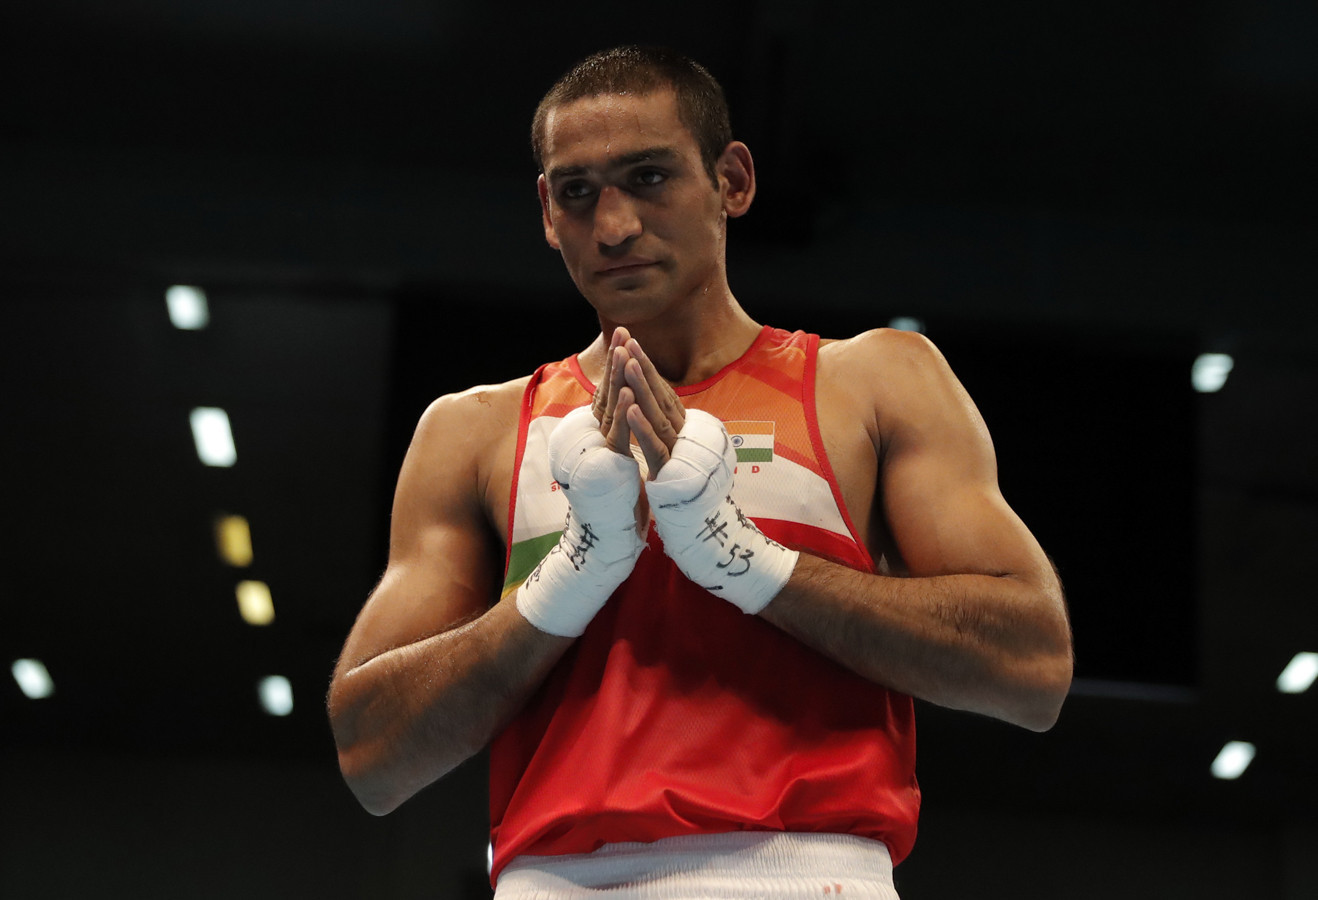 India has so far qualified nine boxers for Tokyo 2020 ©Road to Tokyo